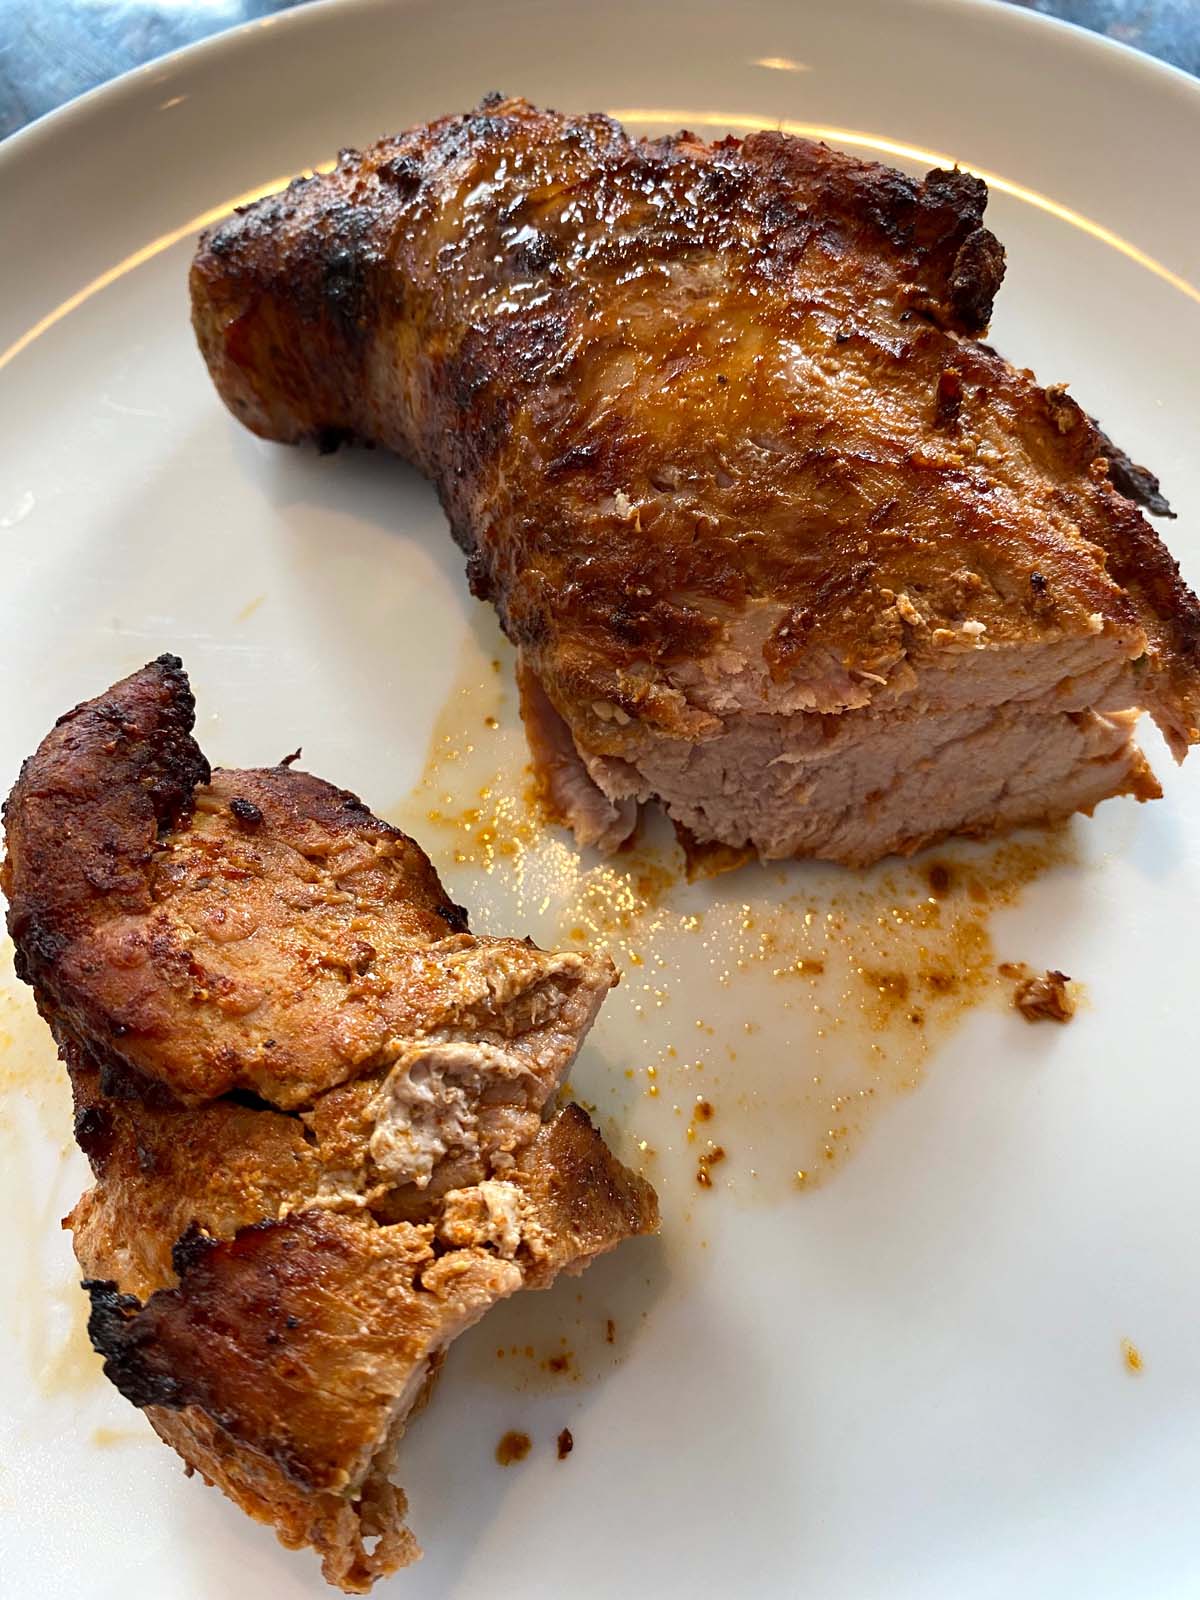 Cooked pork tenderloin cut in half on a white plate.